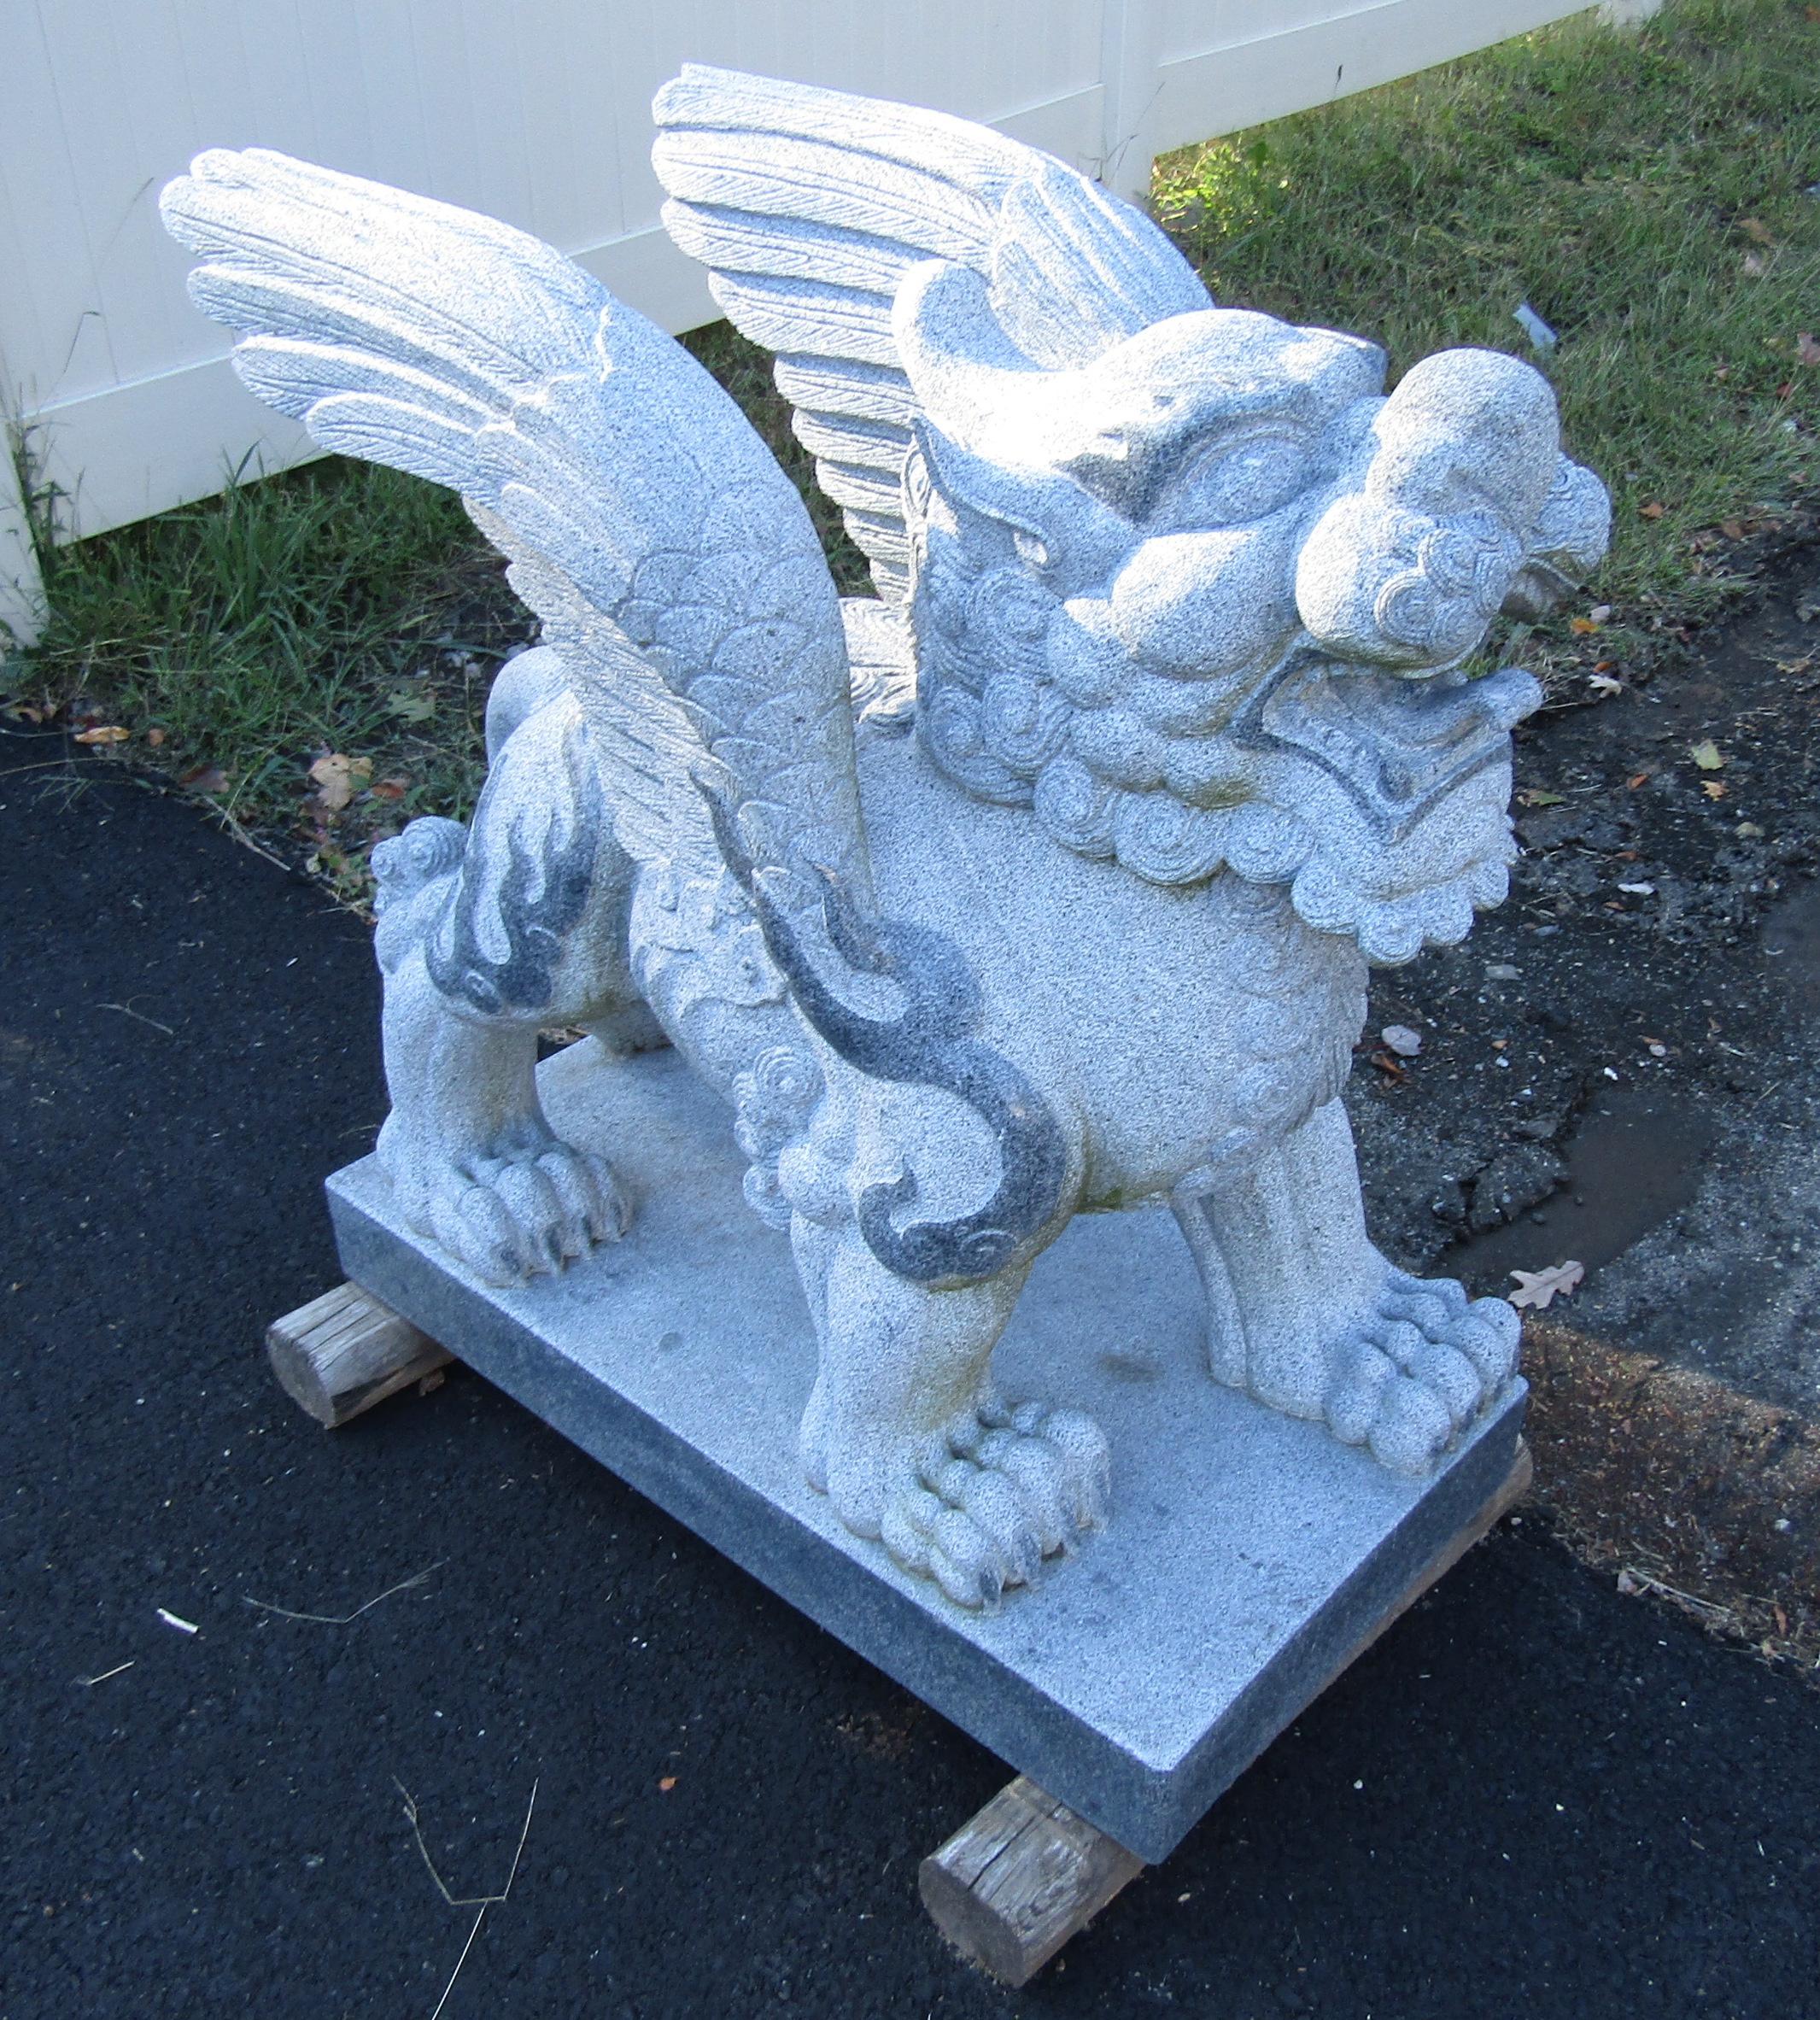 A stunning pair of griffin statues in granite. Well-made with intricate carved detail throughout. These statues look great on each side of the driveway or as a garden decoration. Please confirm item location (NY or NJ).